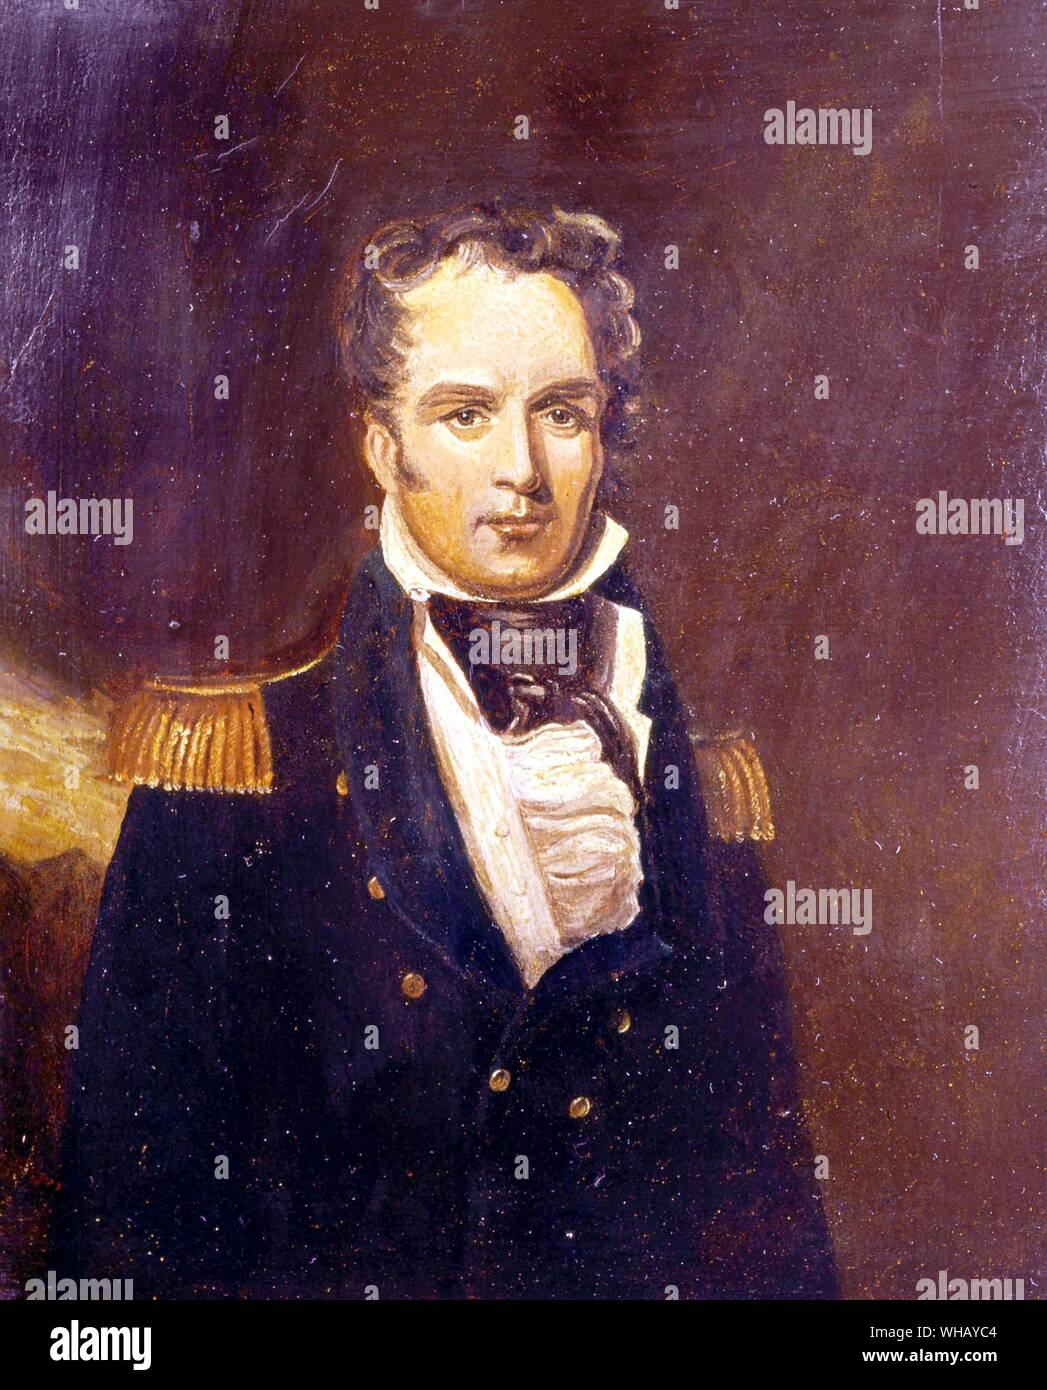 Hugh Clapperton (1788-1827). Scottish traveller and explorer of West and Central Africa. The African Adventure - A History of Africa's Explorers by Timothy Severin, page 114. Stock Photo